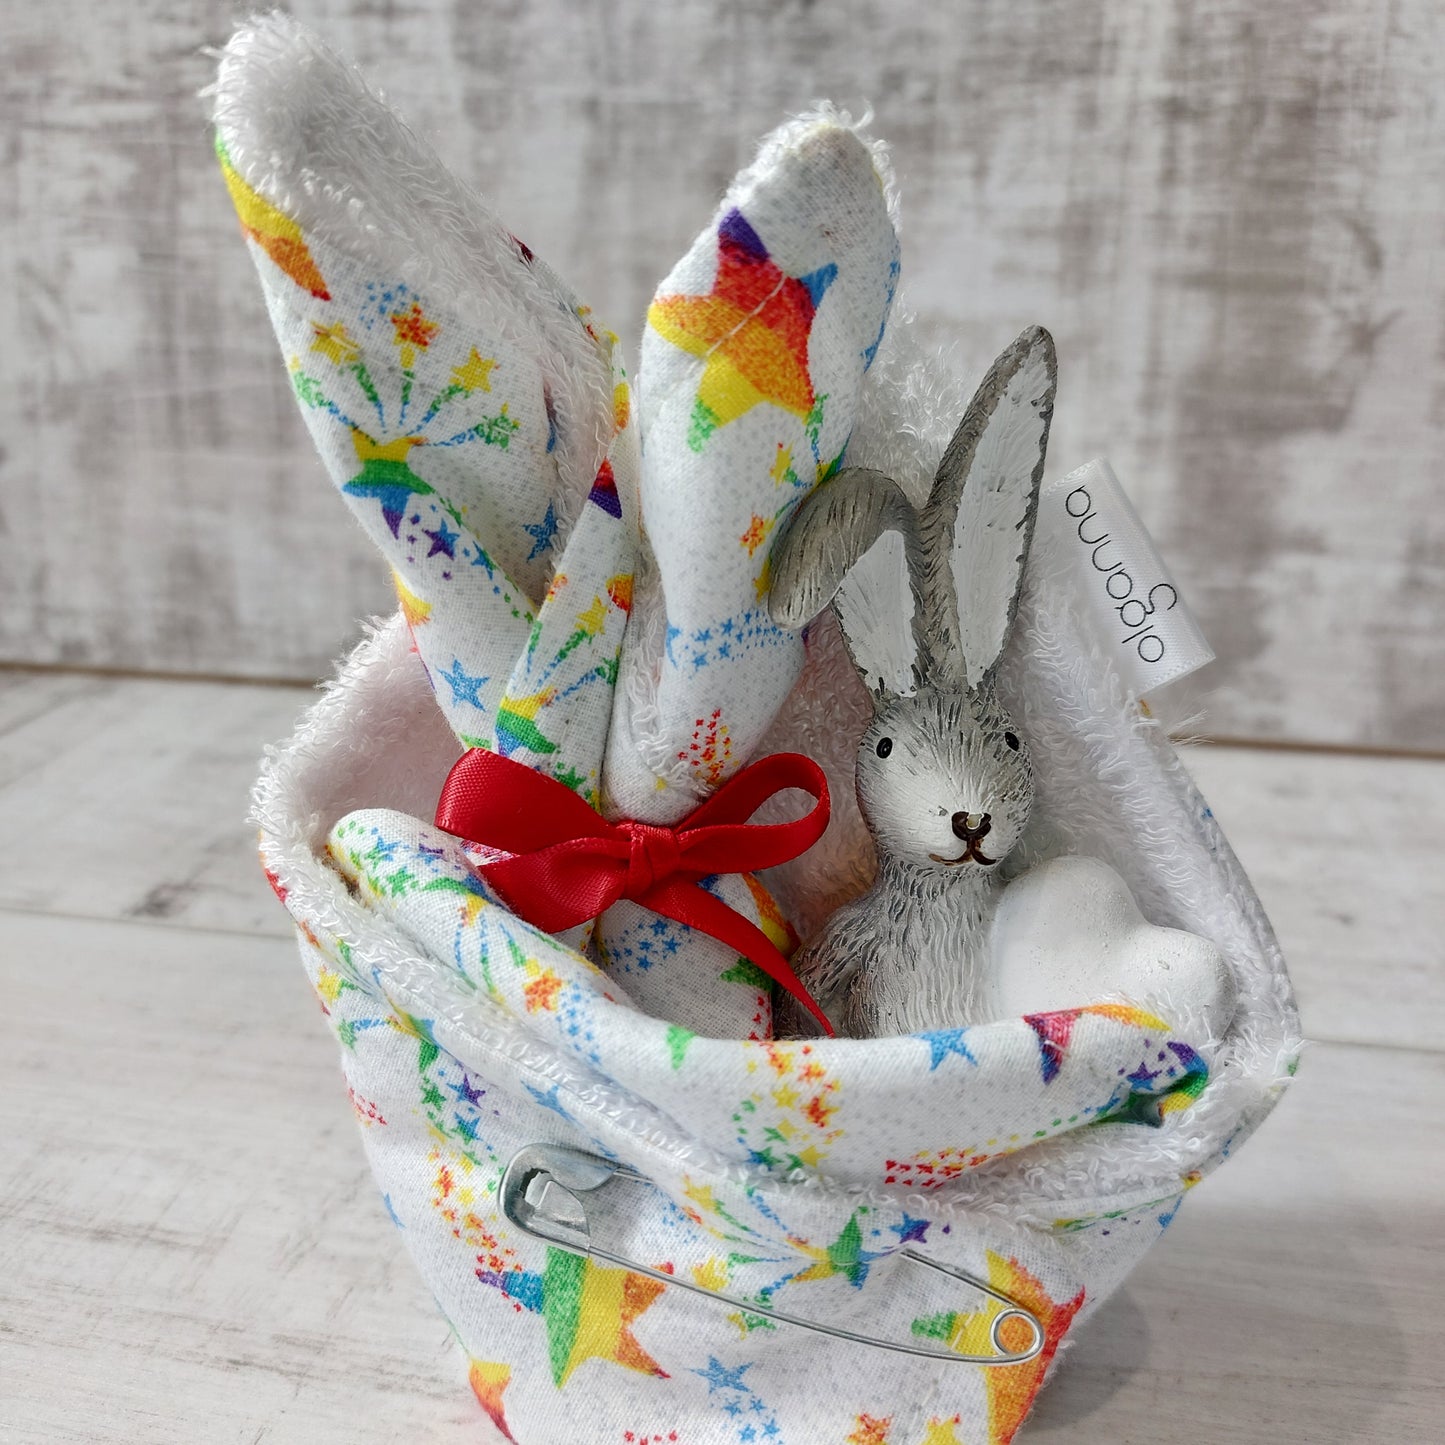 Cute Newborn Gift Set with Reusable Wipes and Bunny Figurine